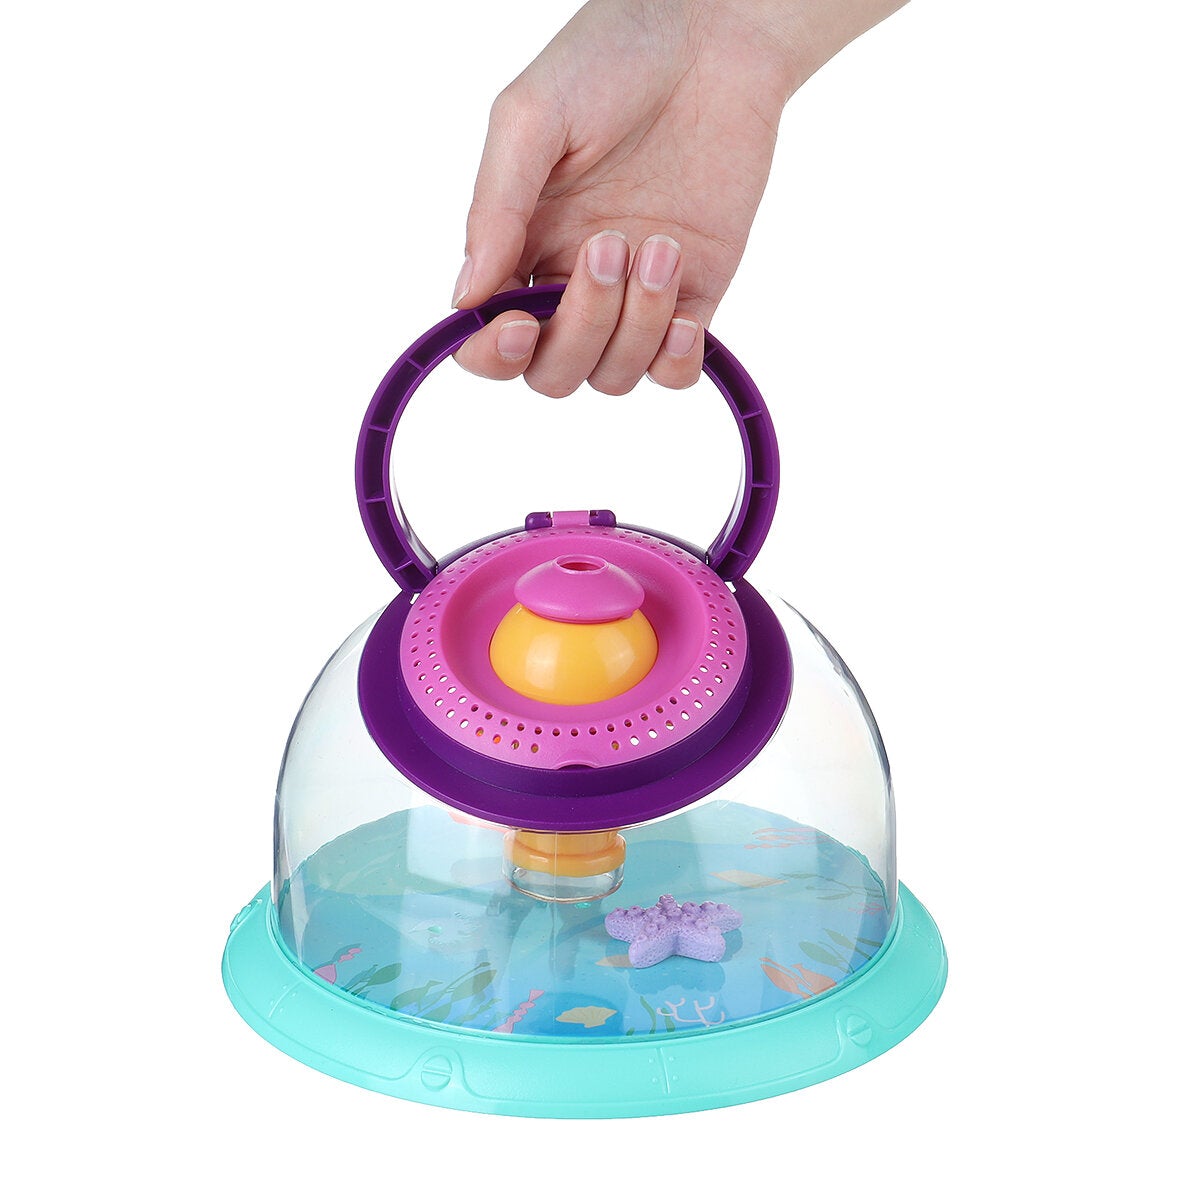 Children Science Observation Box Insect Biological Container with Magnifying Viewer Educational Toy for Kids Gift